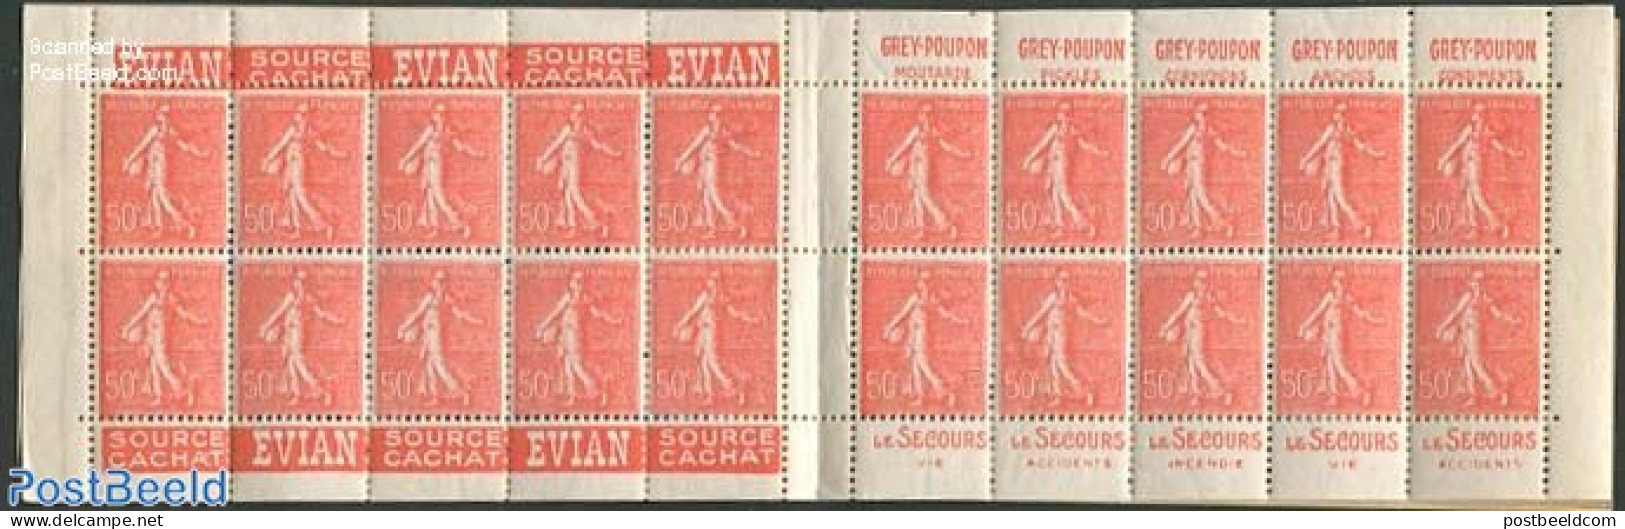 France 1924 20x50c Booklet (Evian-Grey Pooupon-Evian-Le Secours), Mint NH, Stamp Booklets - Nuevos